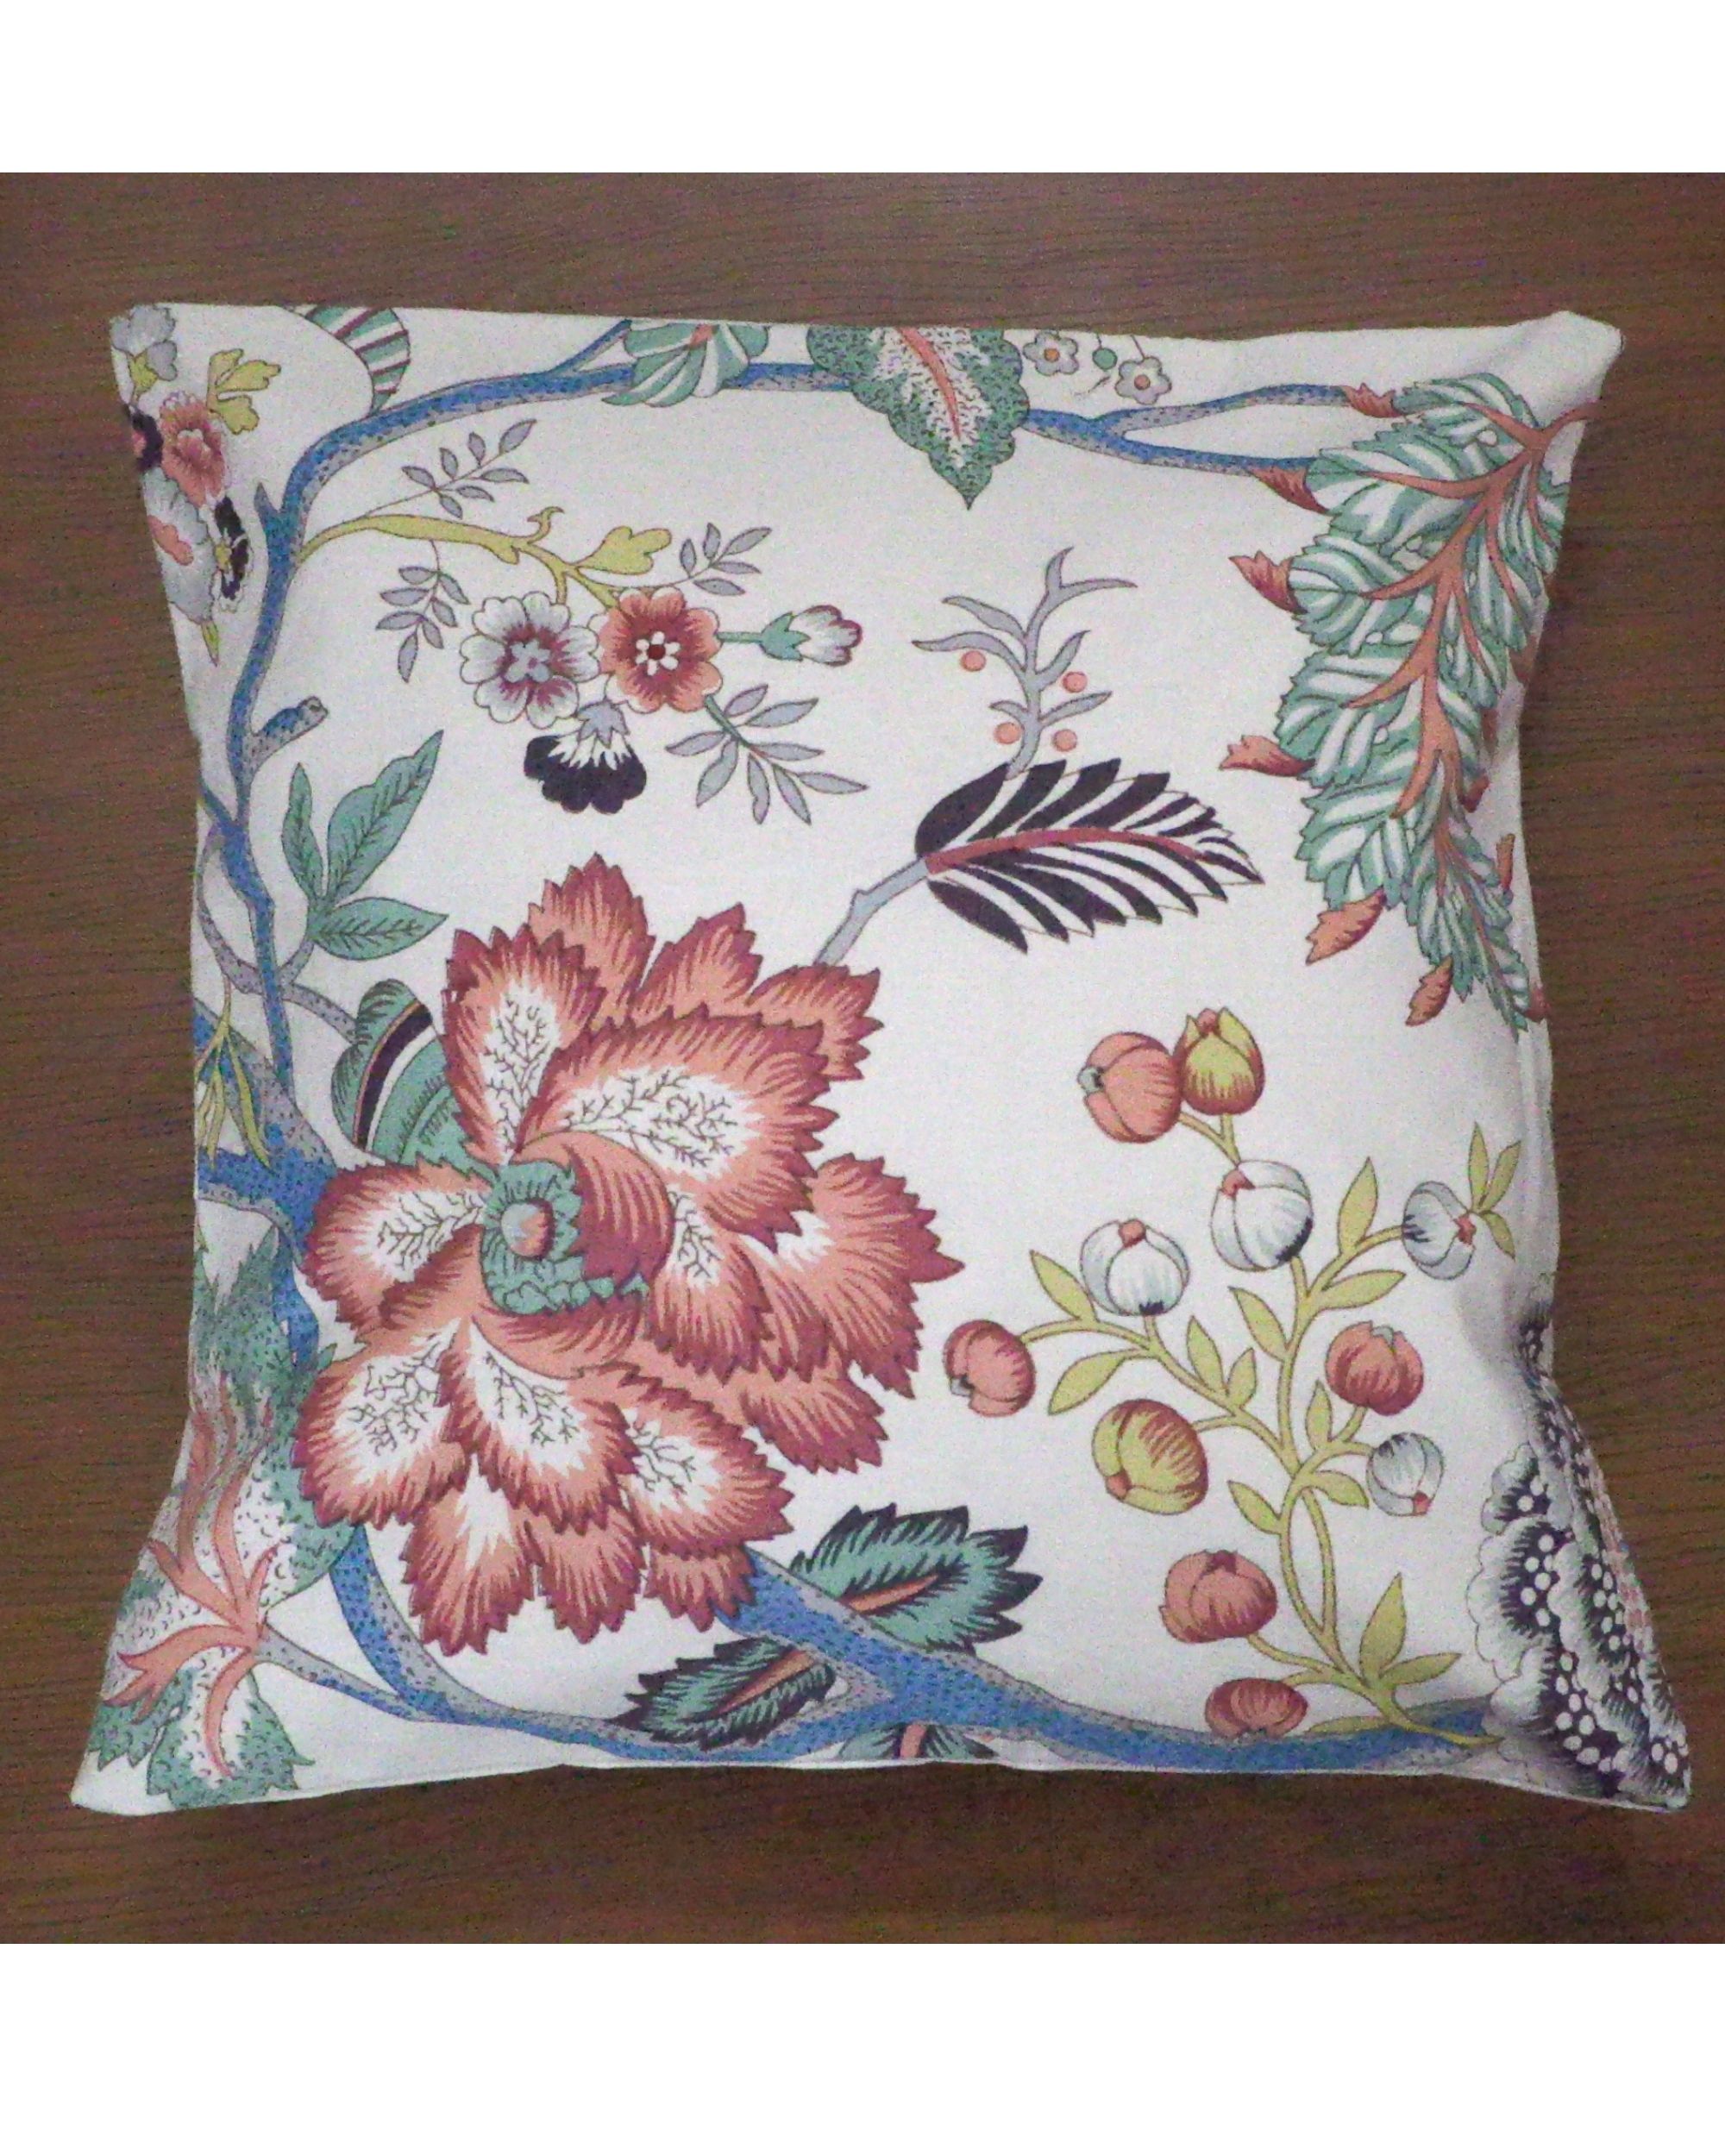 Cotton Printed Small Cushion Cover